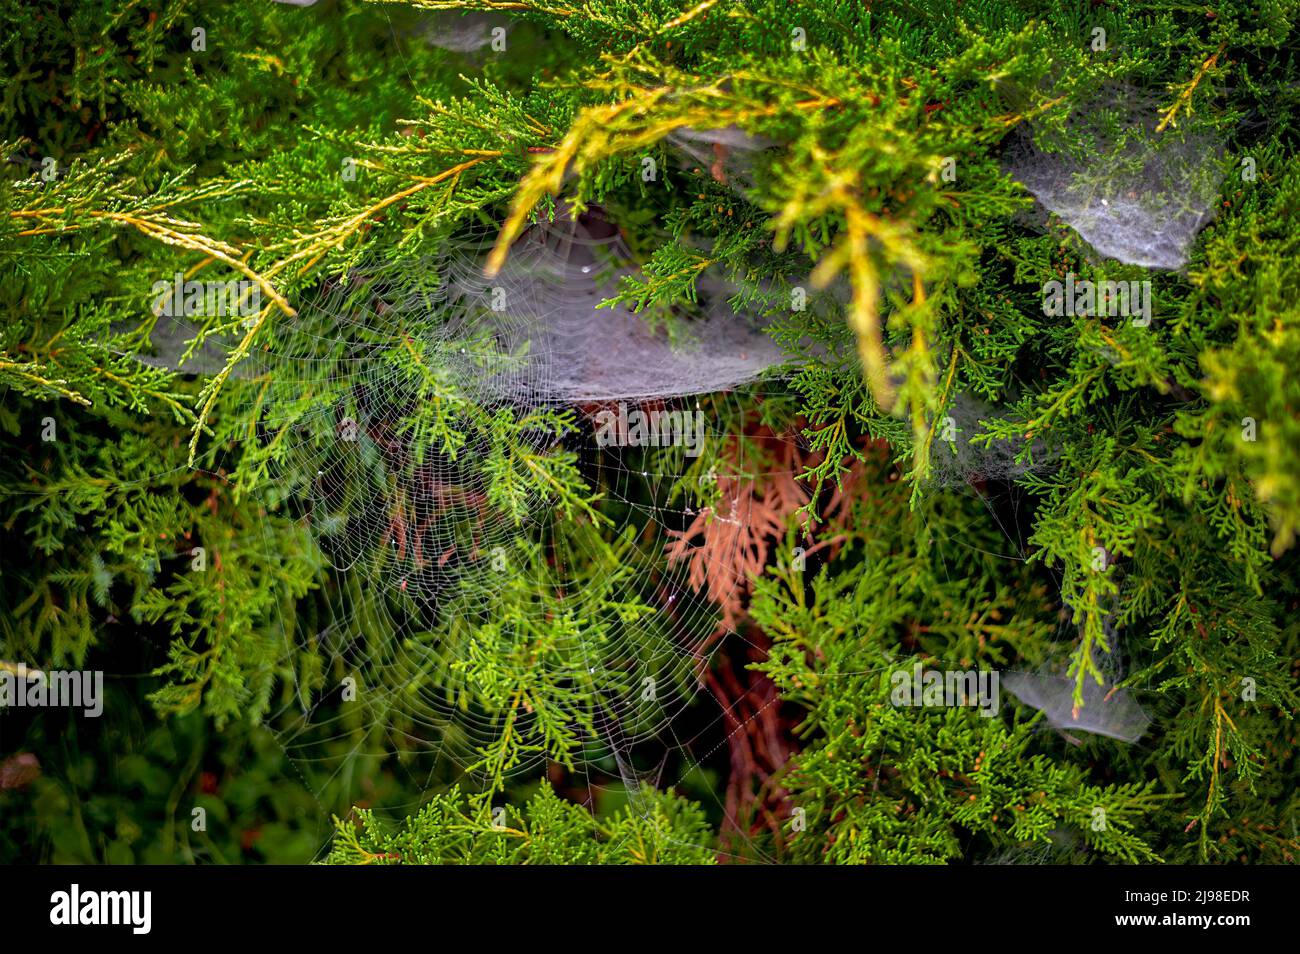 Spider webs and Thuja tree. Spider webs and cobwebs are everywhere in French gardens. Stock Photo